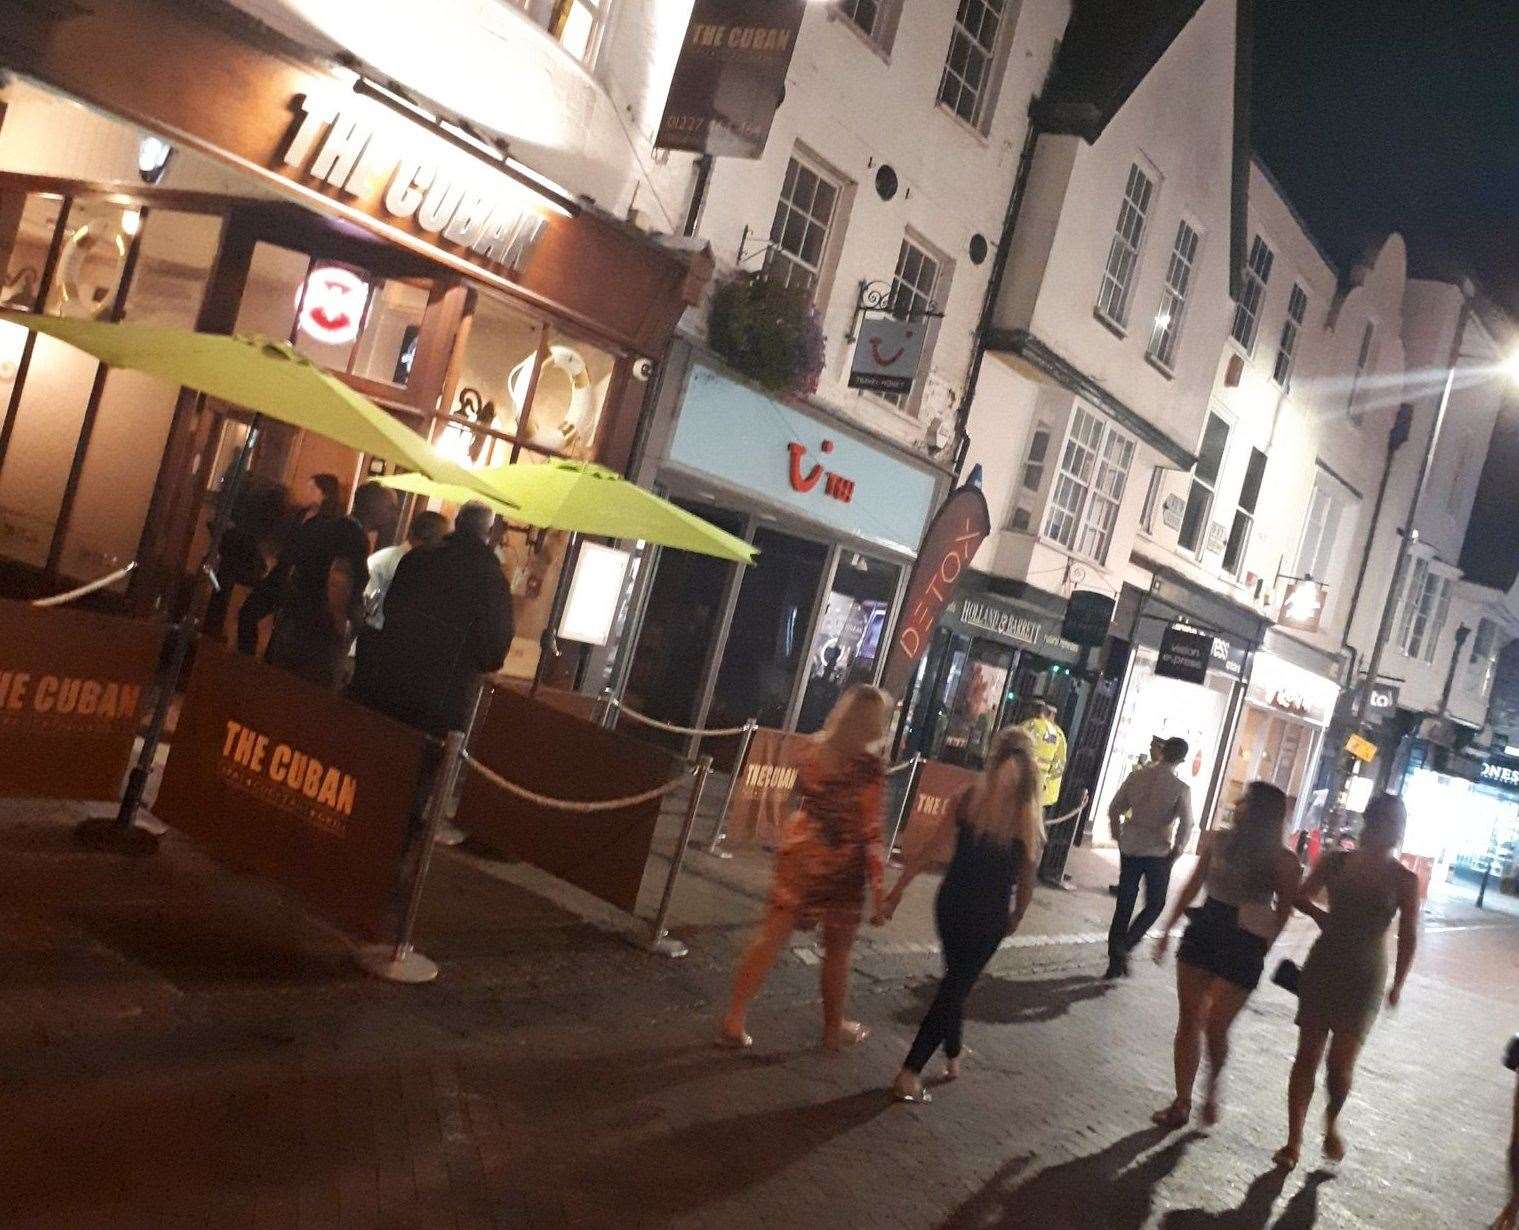 A knife arch was used at The Cuban in Canterbury by police to check people were not carrying weapons. (14673593)